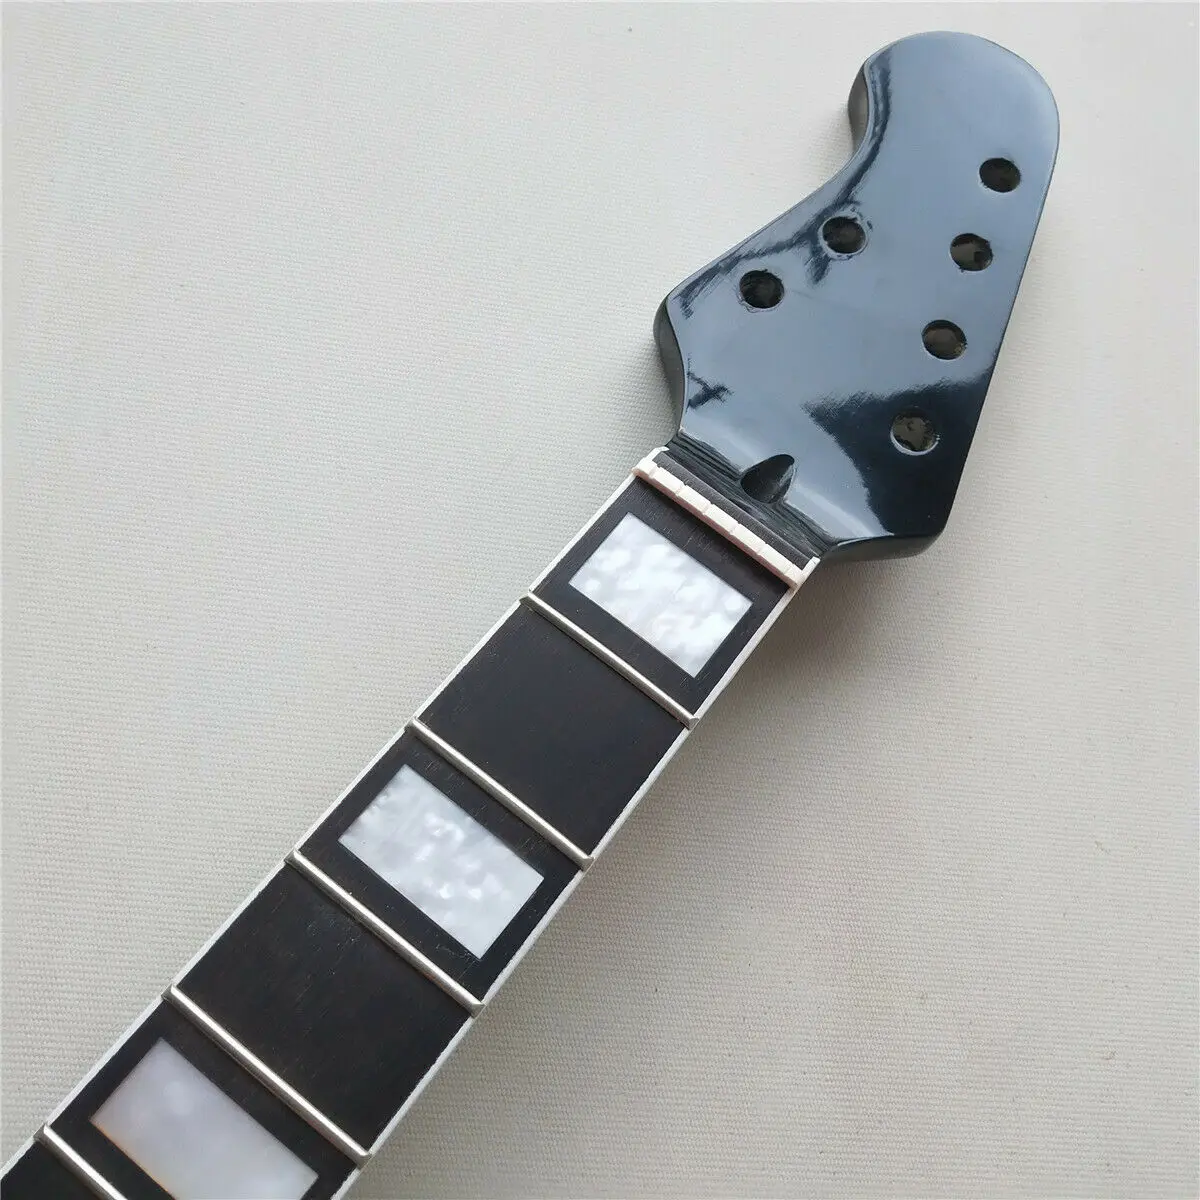 Enlarge Reverse head Black 4+2 Tuners Guitar Neck 22Fret 25.5inch Rosewood Fretboard parts New Replacement